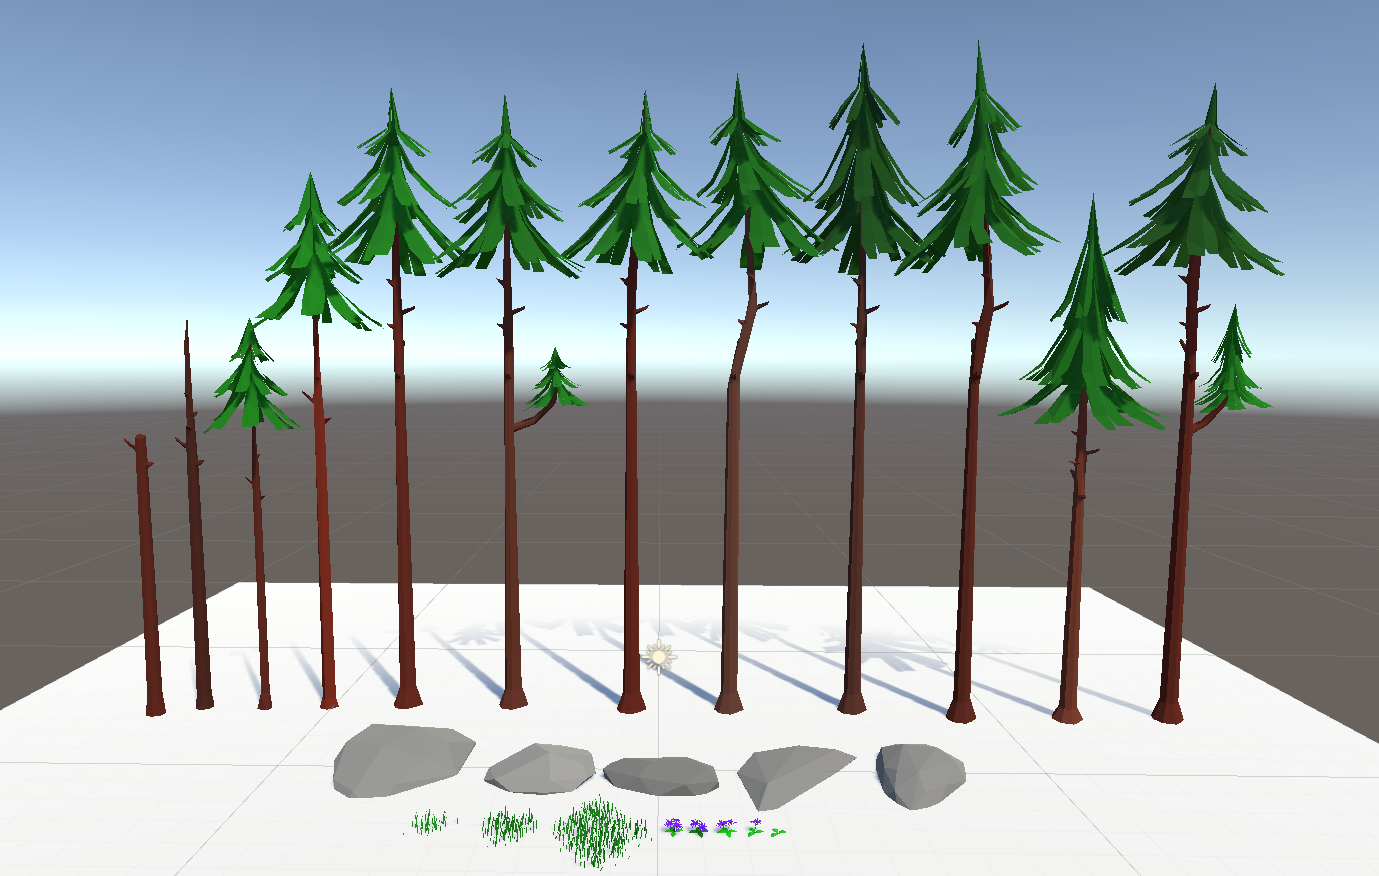 LowPoly Pine Tree Asset Pack